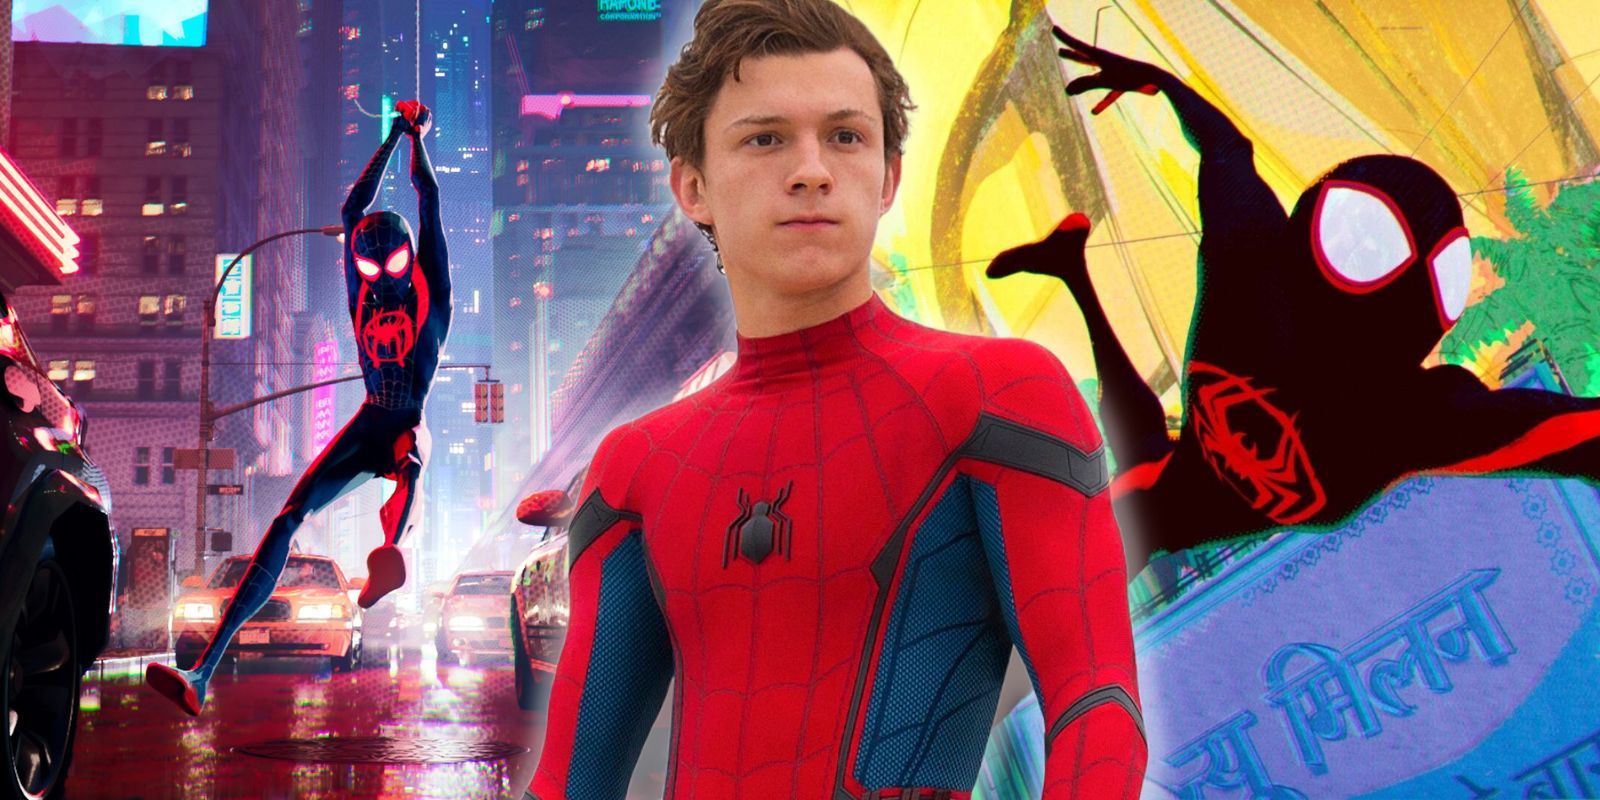 Tom Holland's Spider-Man wedged between Miles Morales in action